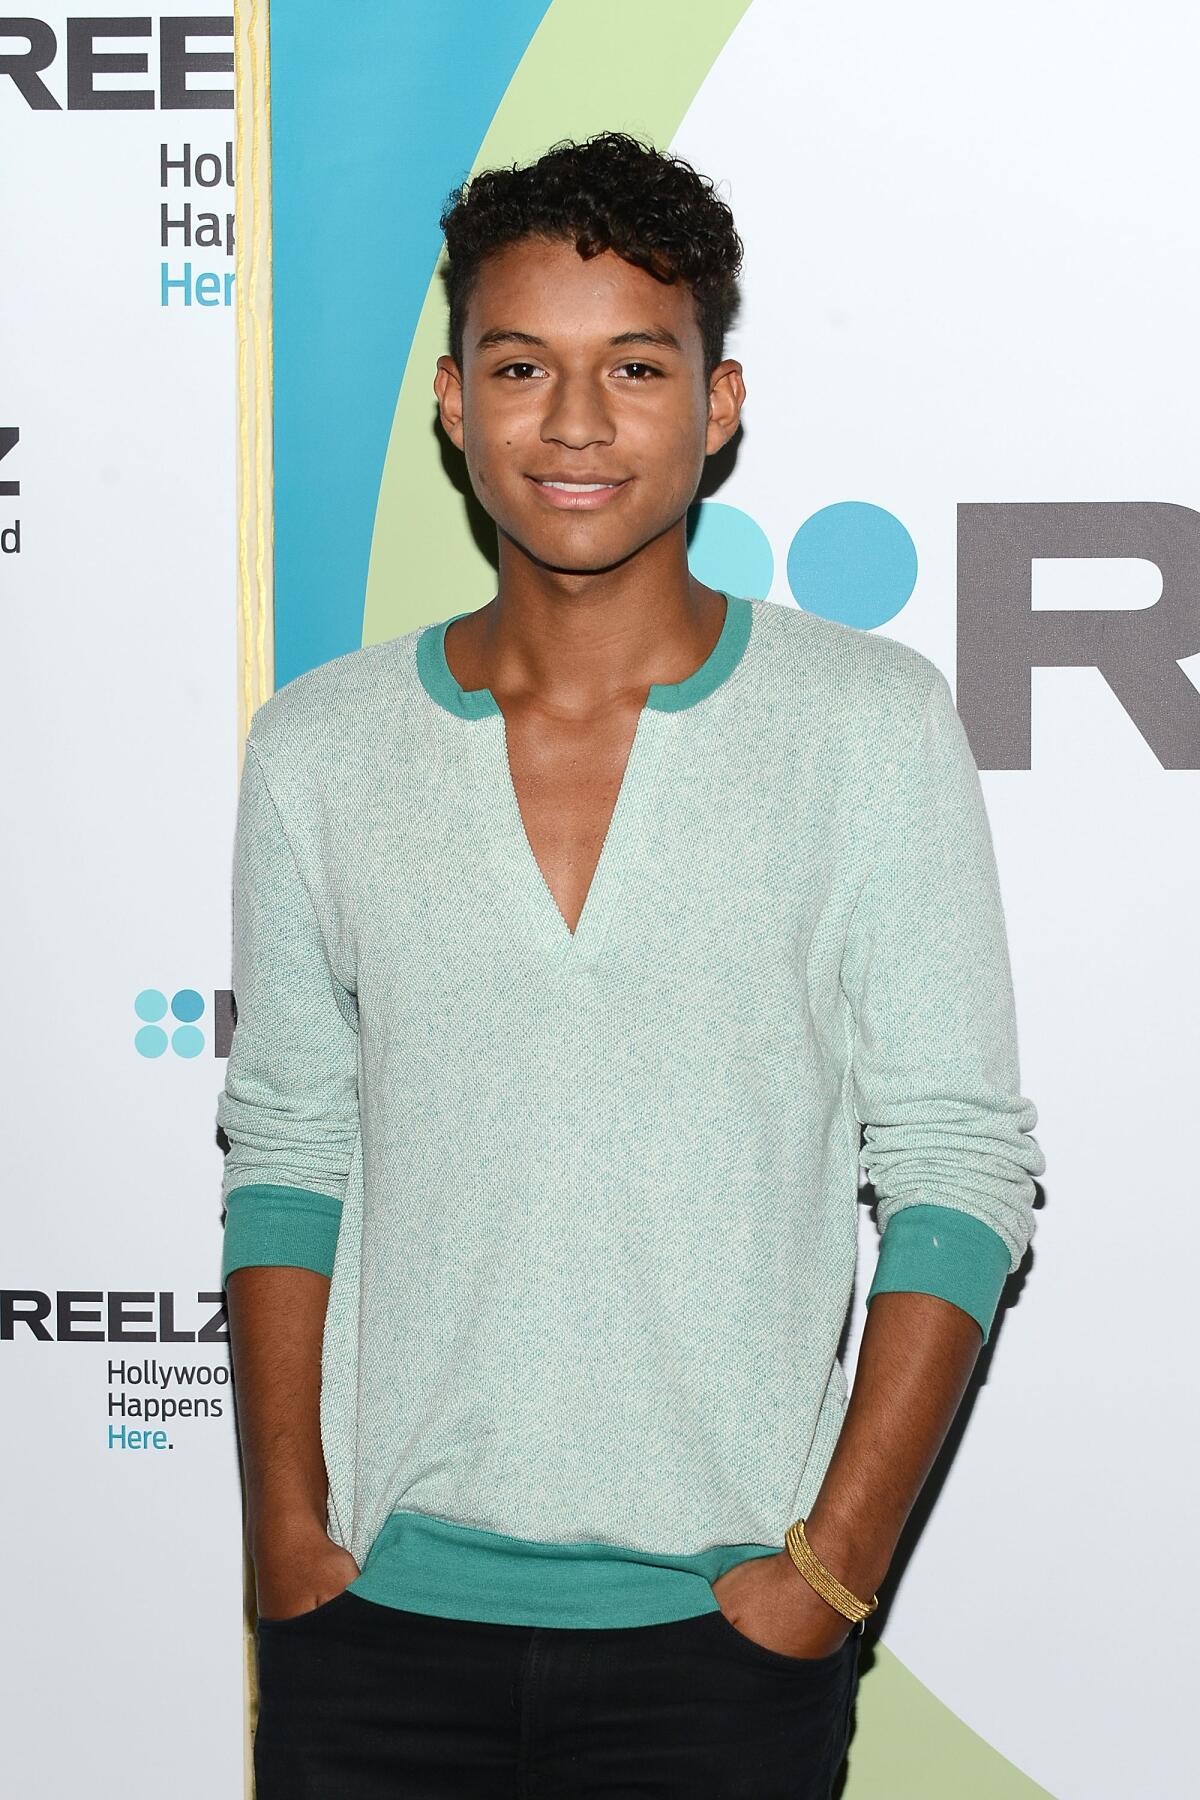 A young man in black pants and a light cool-green v-neck shirt posing for the camera, smiling.